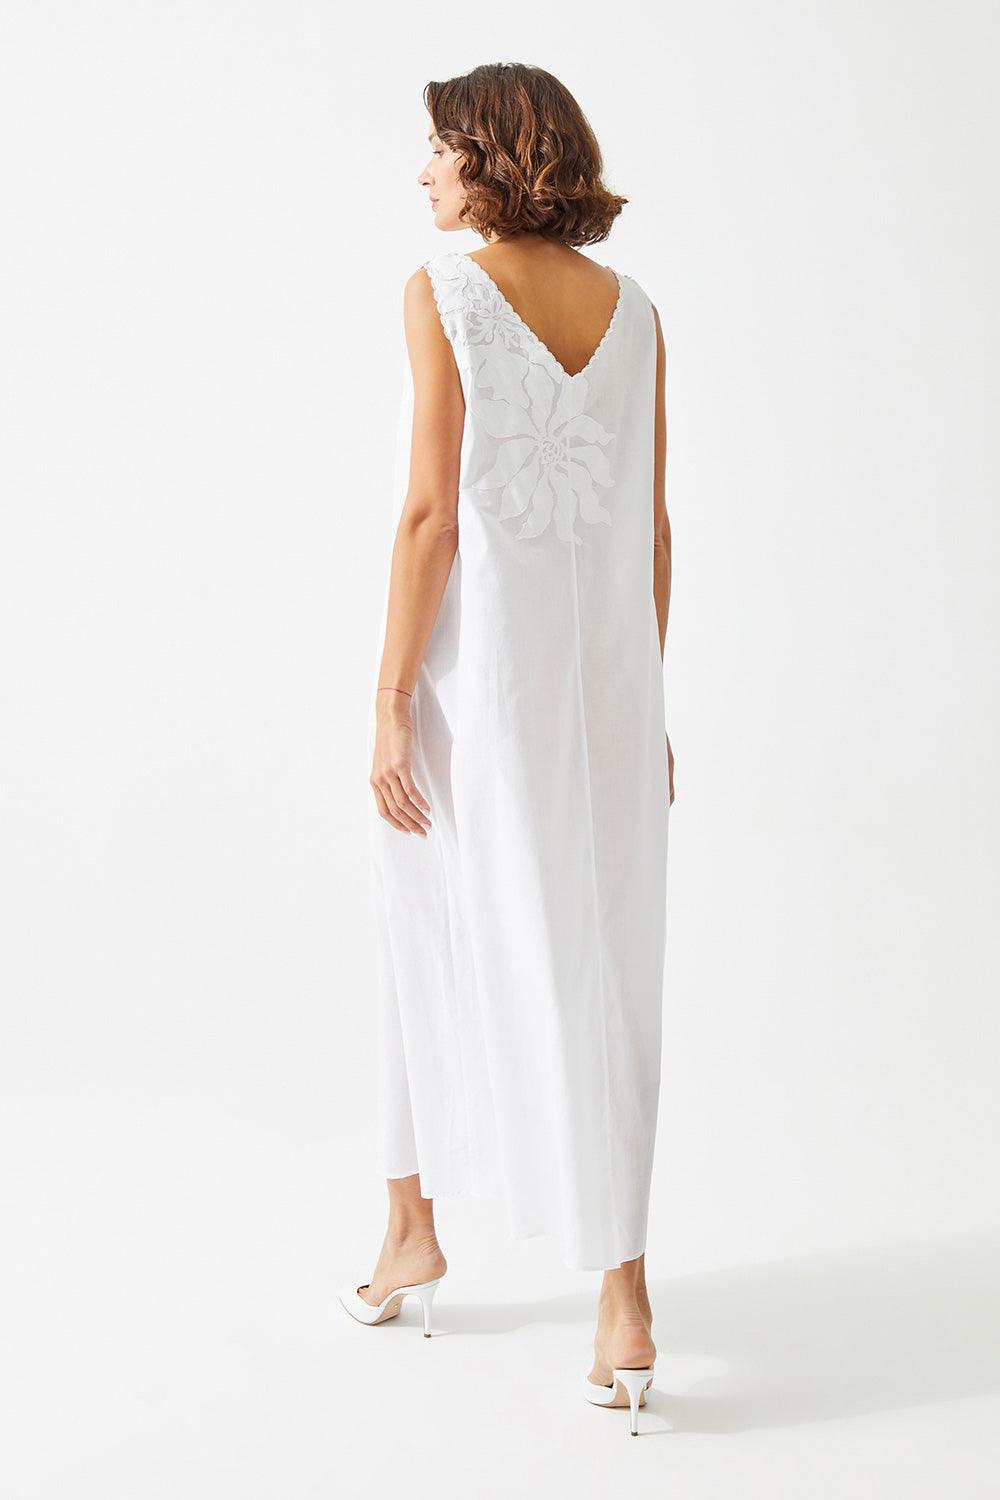 Aila Long Cotton Embroidered with Lace V Neck Nightgown - Off White - Bocan